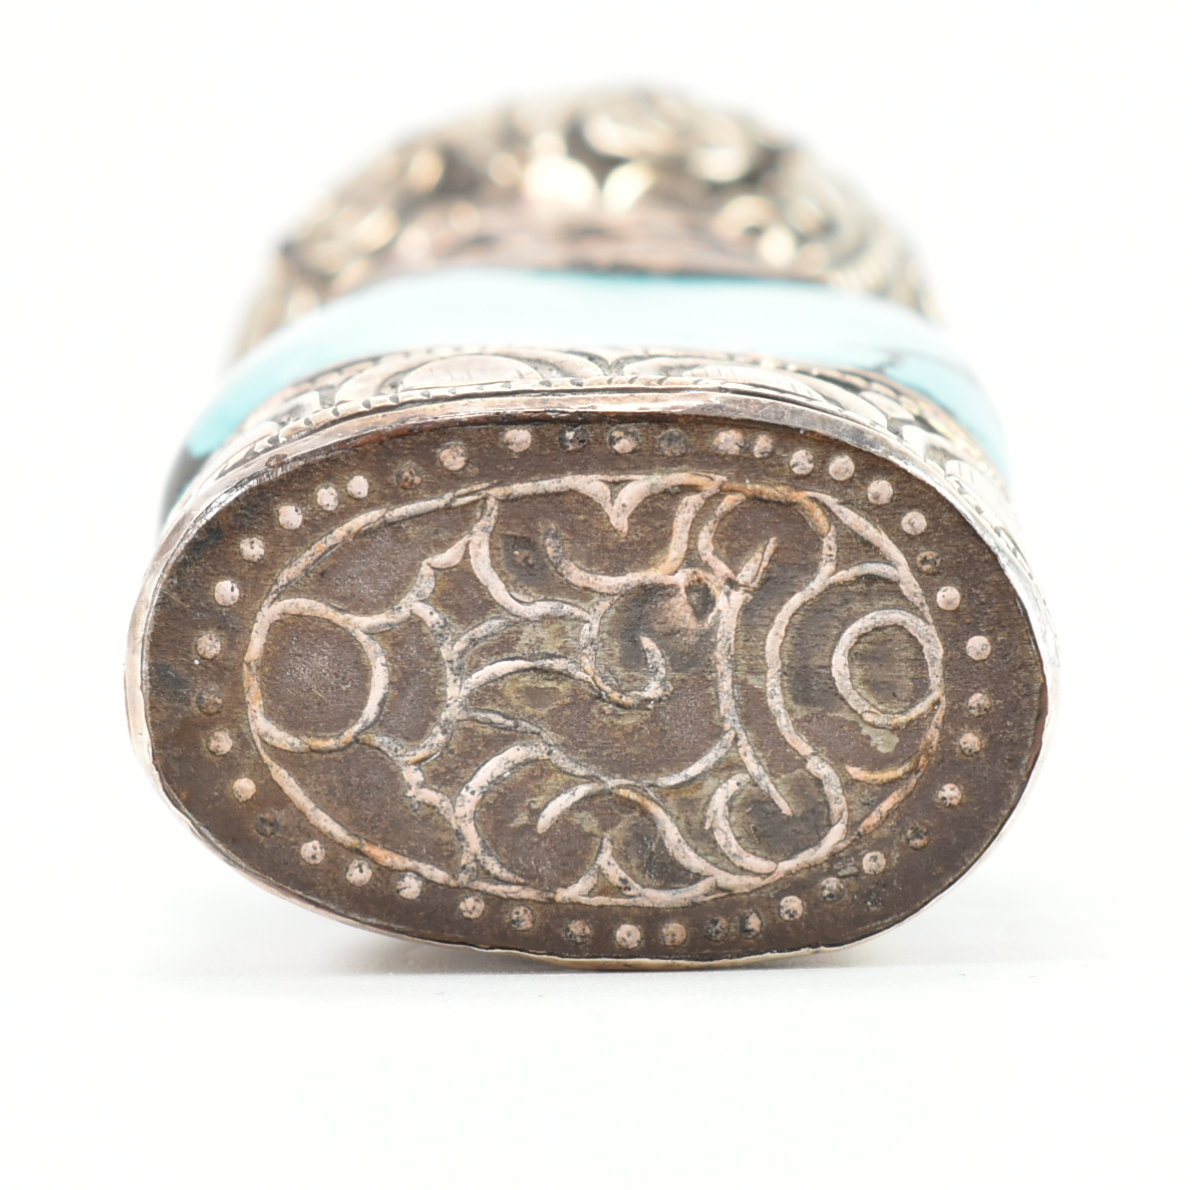 TIBETAN SILVER & TURQUOISE PERSONAL SEAL - Image 6 of 7